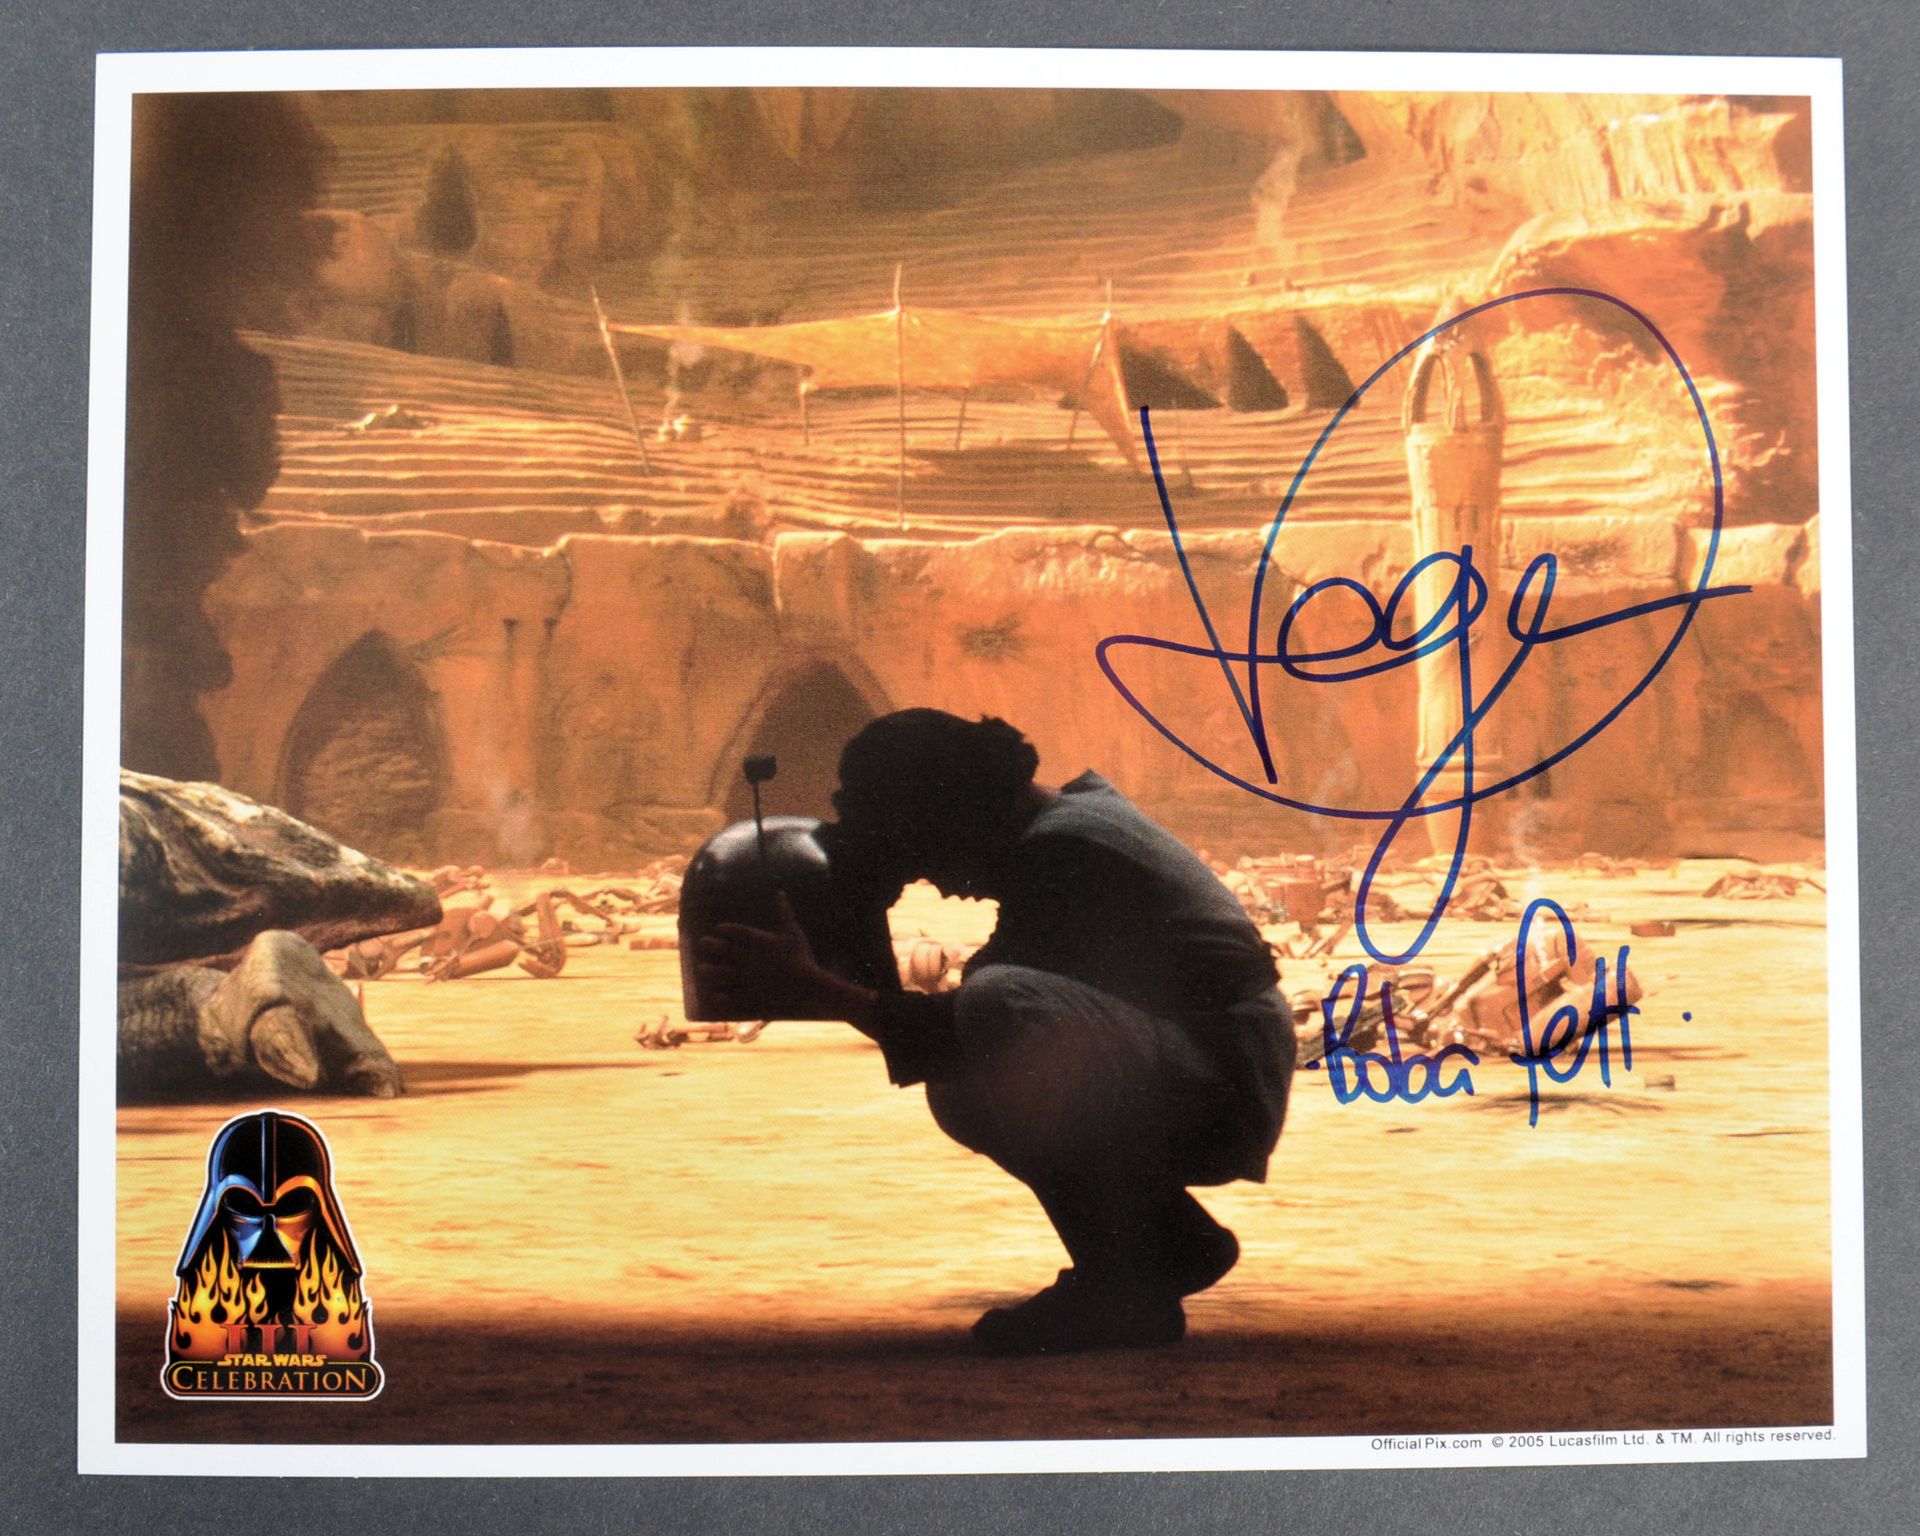 ESTATE OF DAVE PROWSE – STAR WARS OFFICIAL PIX CELEBRATION III SIGNED PHOTO